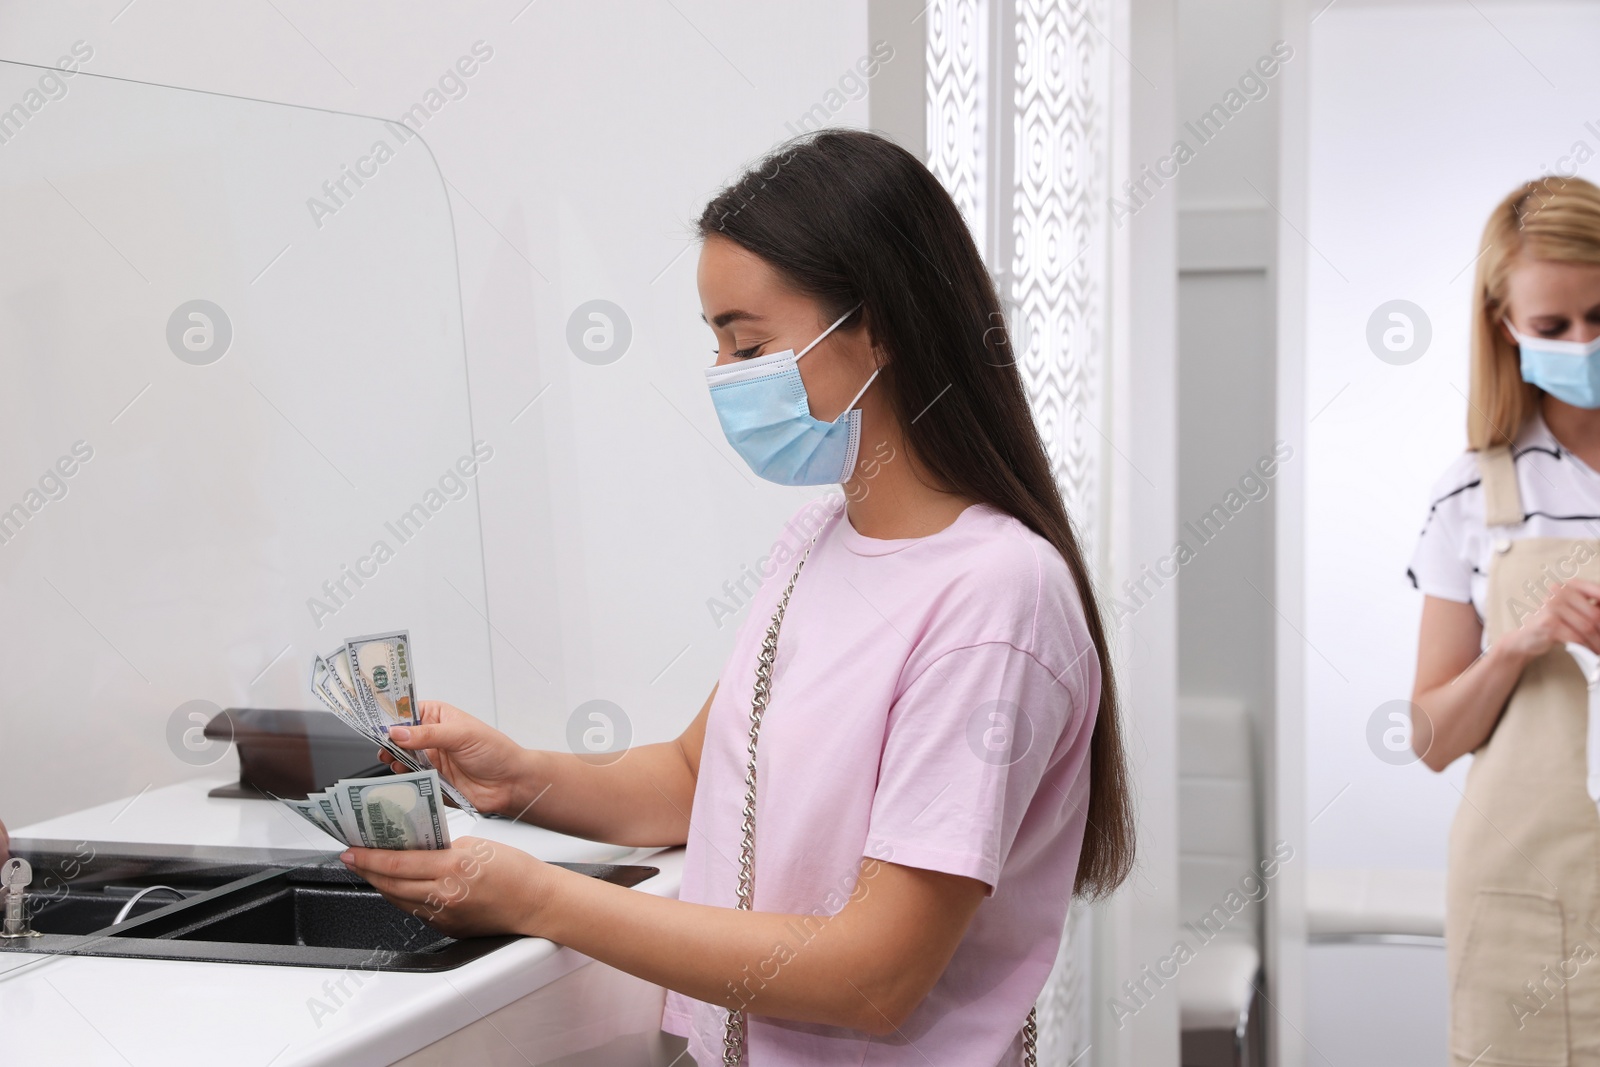 Photo of Woman with protective mask counting money at cash department window in bank. Currency exchange